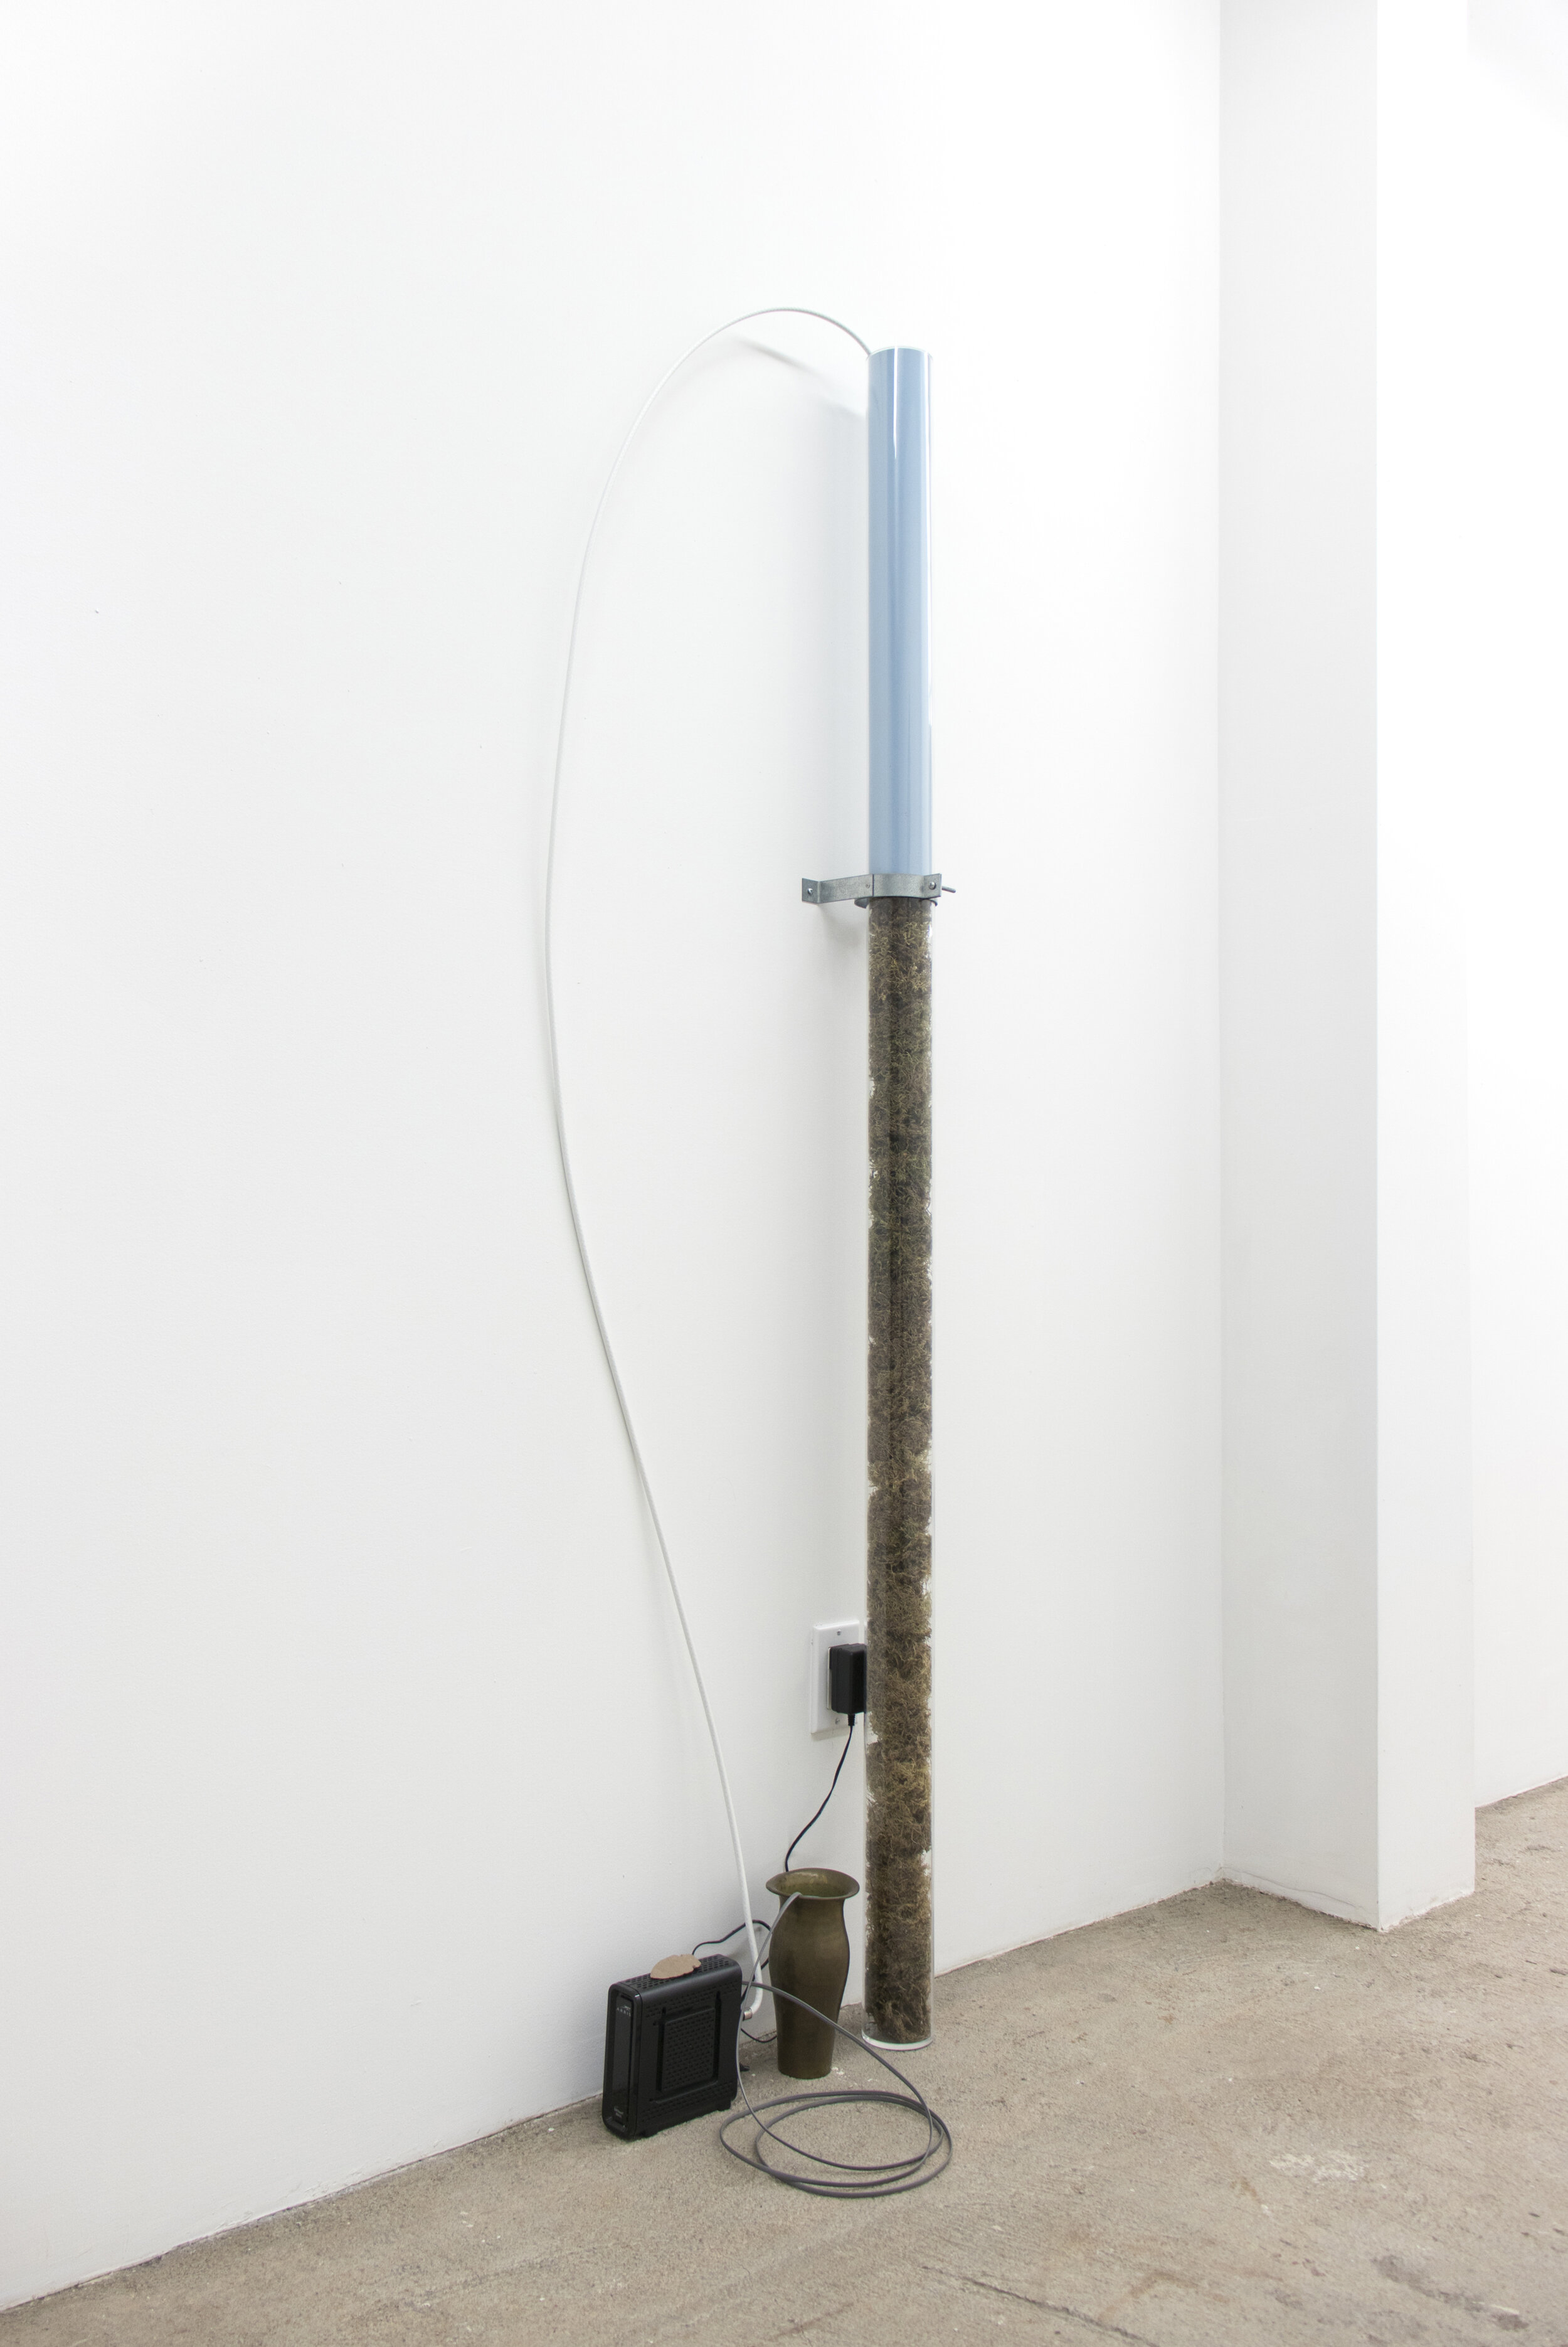  Connor McNicholas  Phase Transition , 2020 Plexiglass, unprocessed photographic paper, moss, bronze,  modem, carved stone, silicone, cables, hardware 17 x 72 inches (43.18 x 182.88 cm) (CM12) 